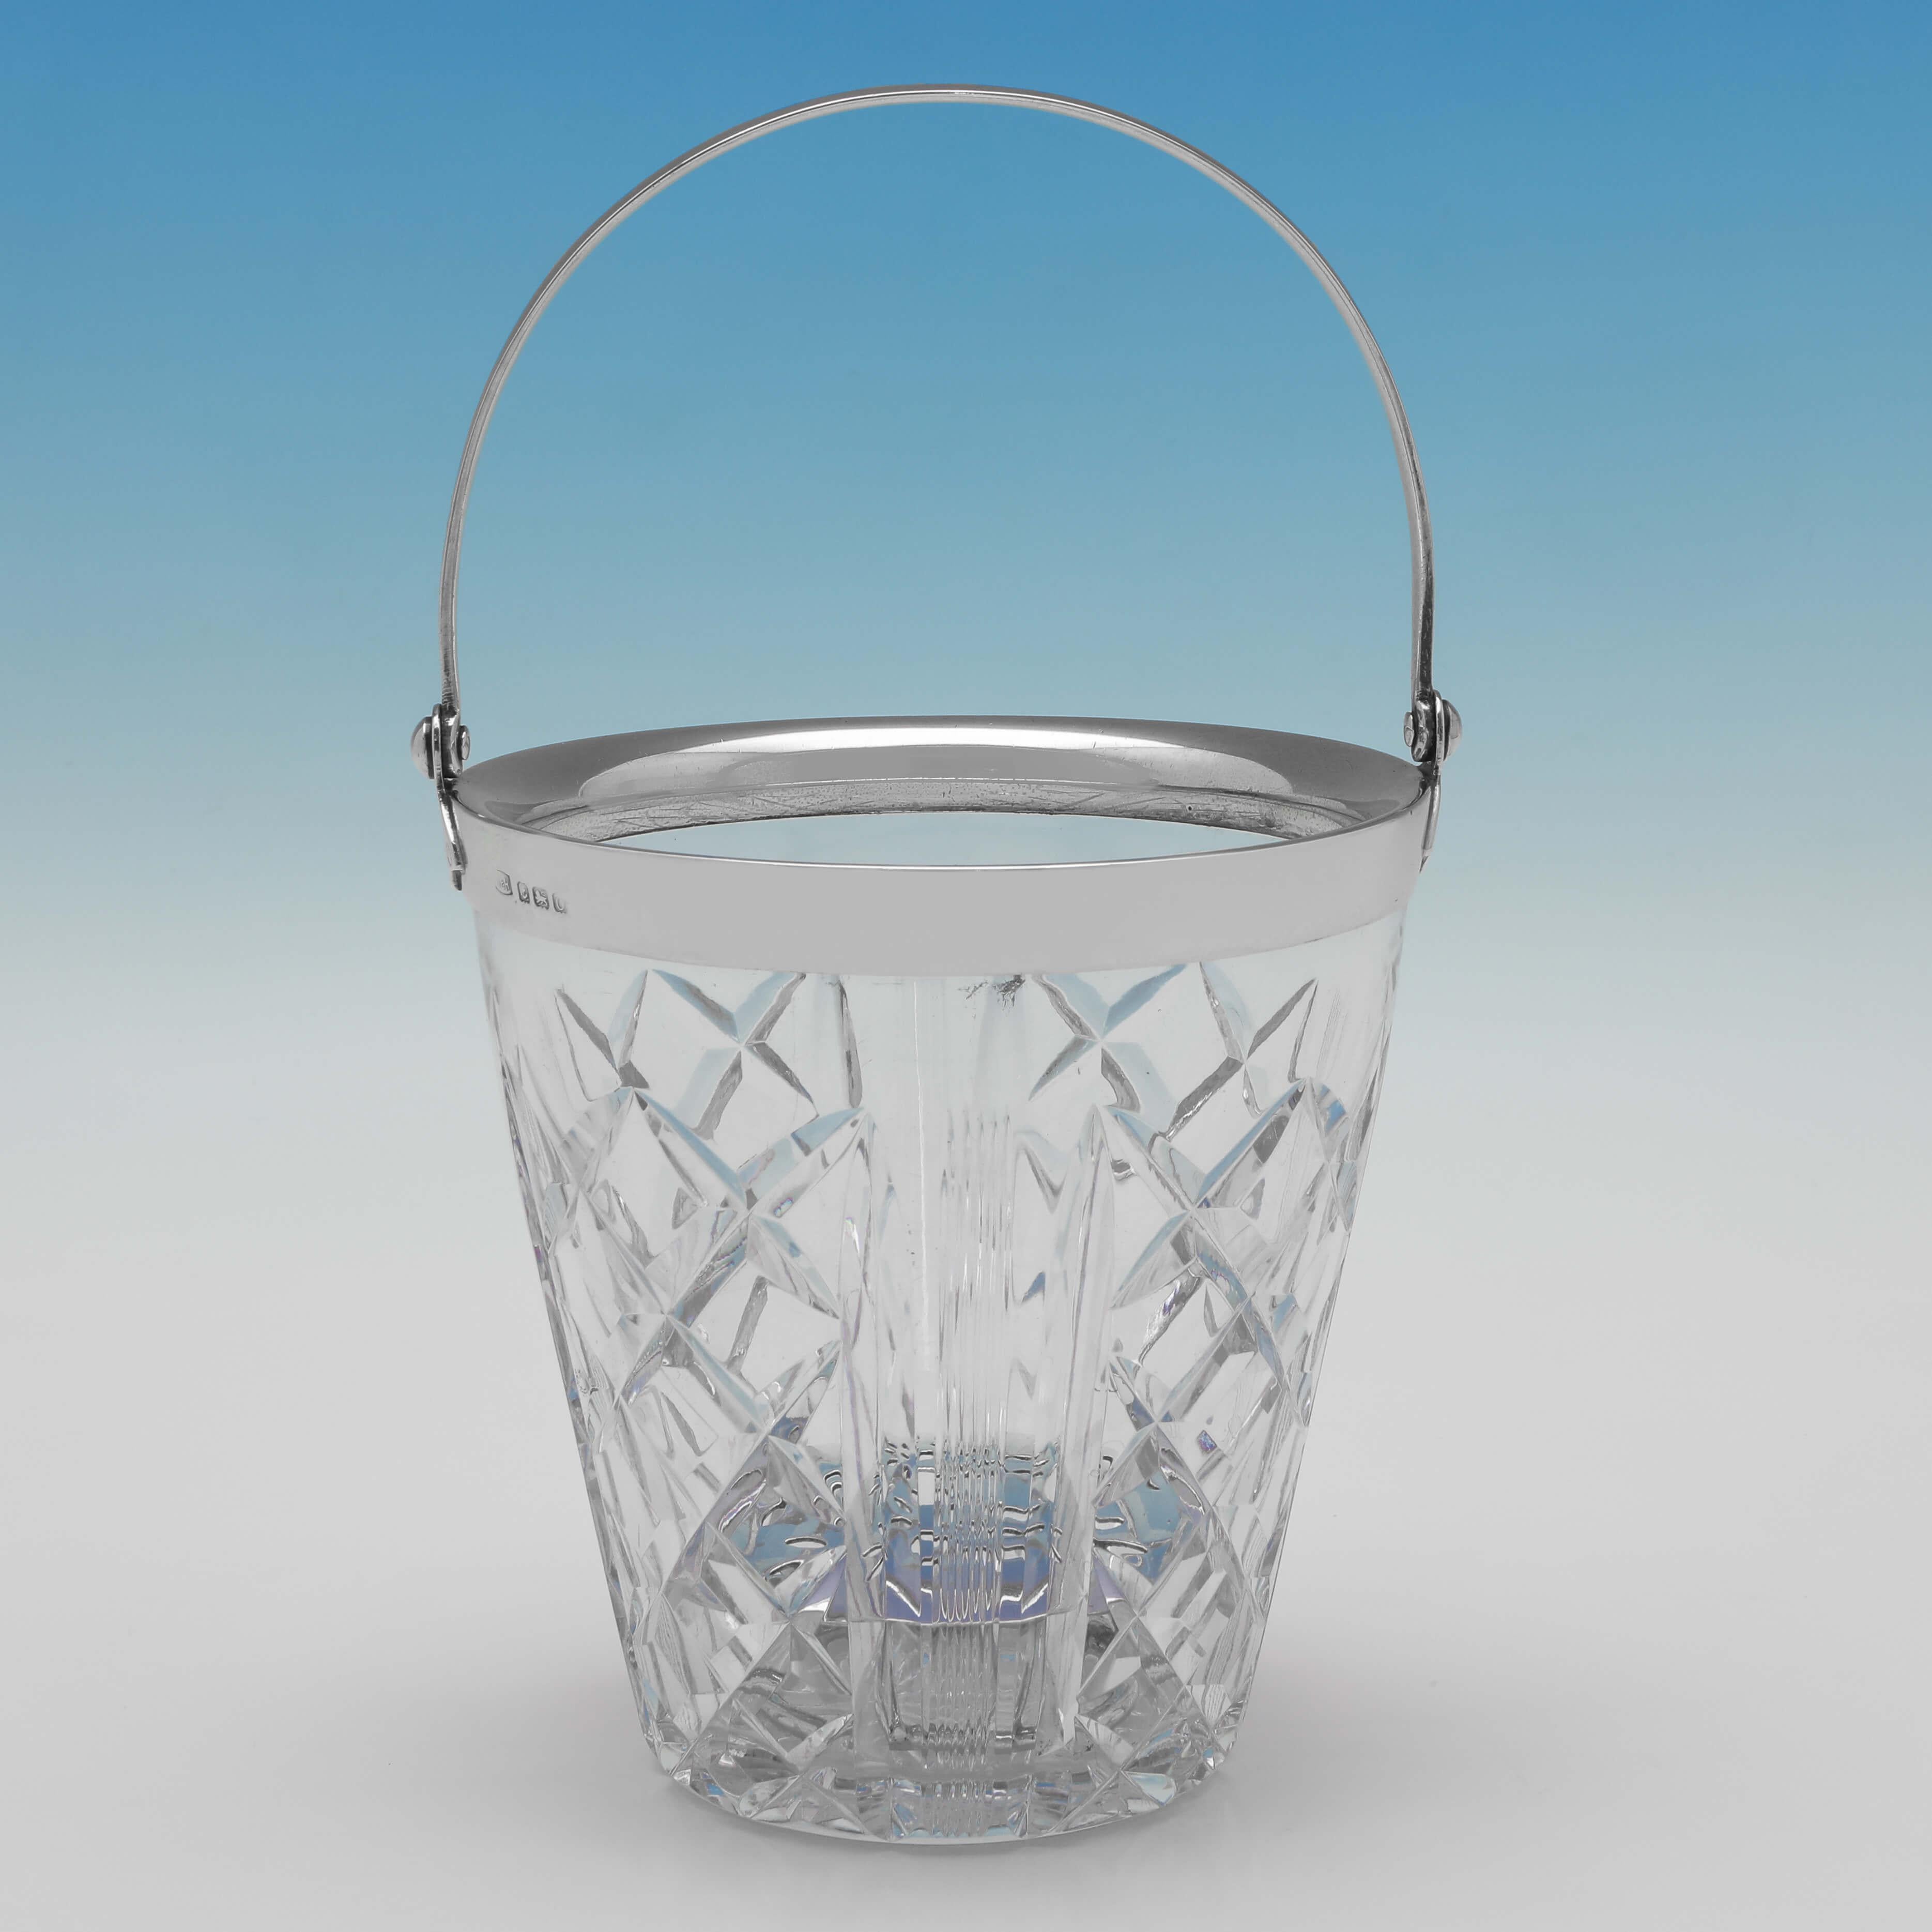 Hallmarked in London in 1938 by Hukin & Heath, this handsome, glass & sterling silver ice bucket, is in the Art Deco taste. 

The ice bucket measures 5